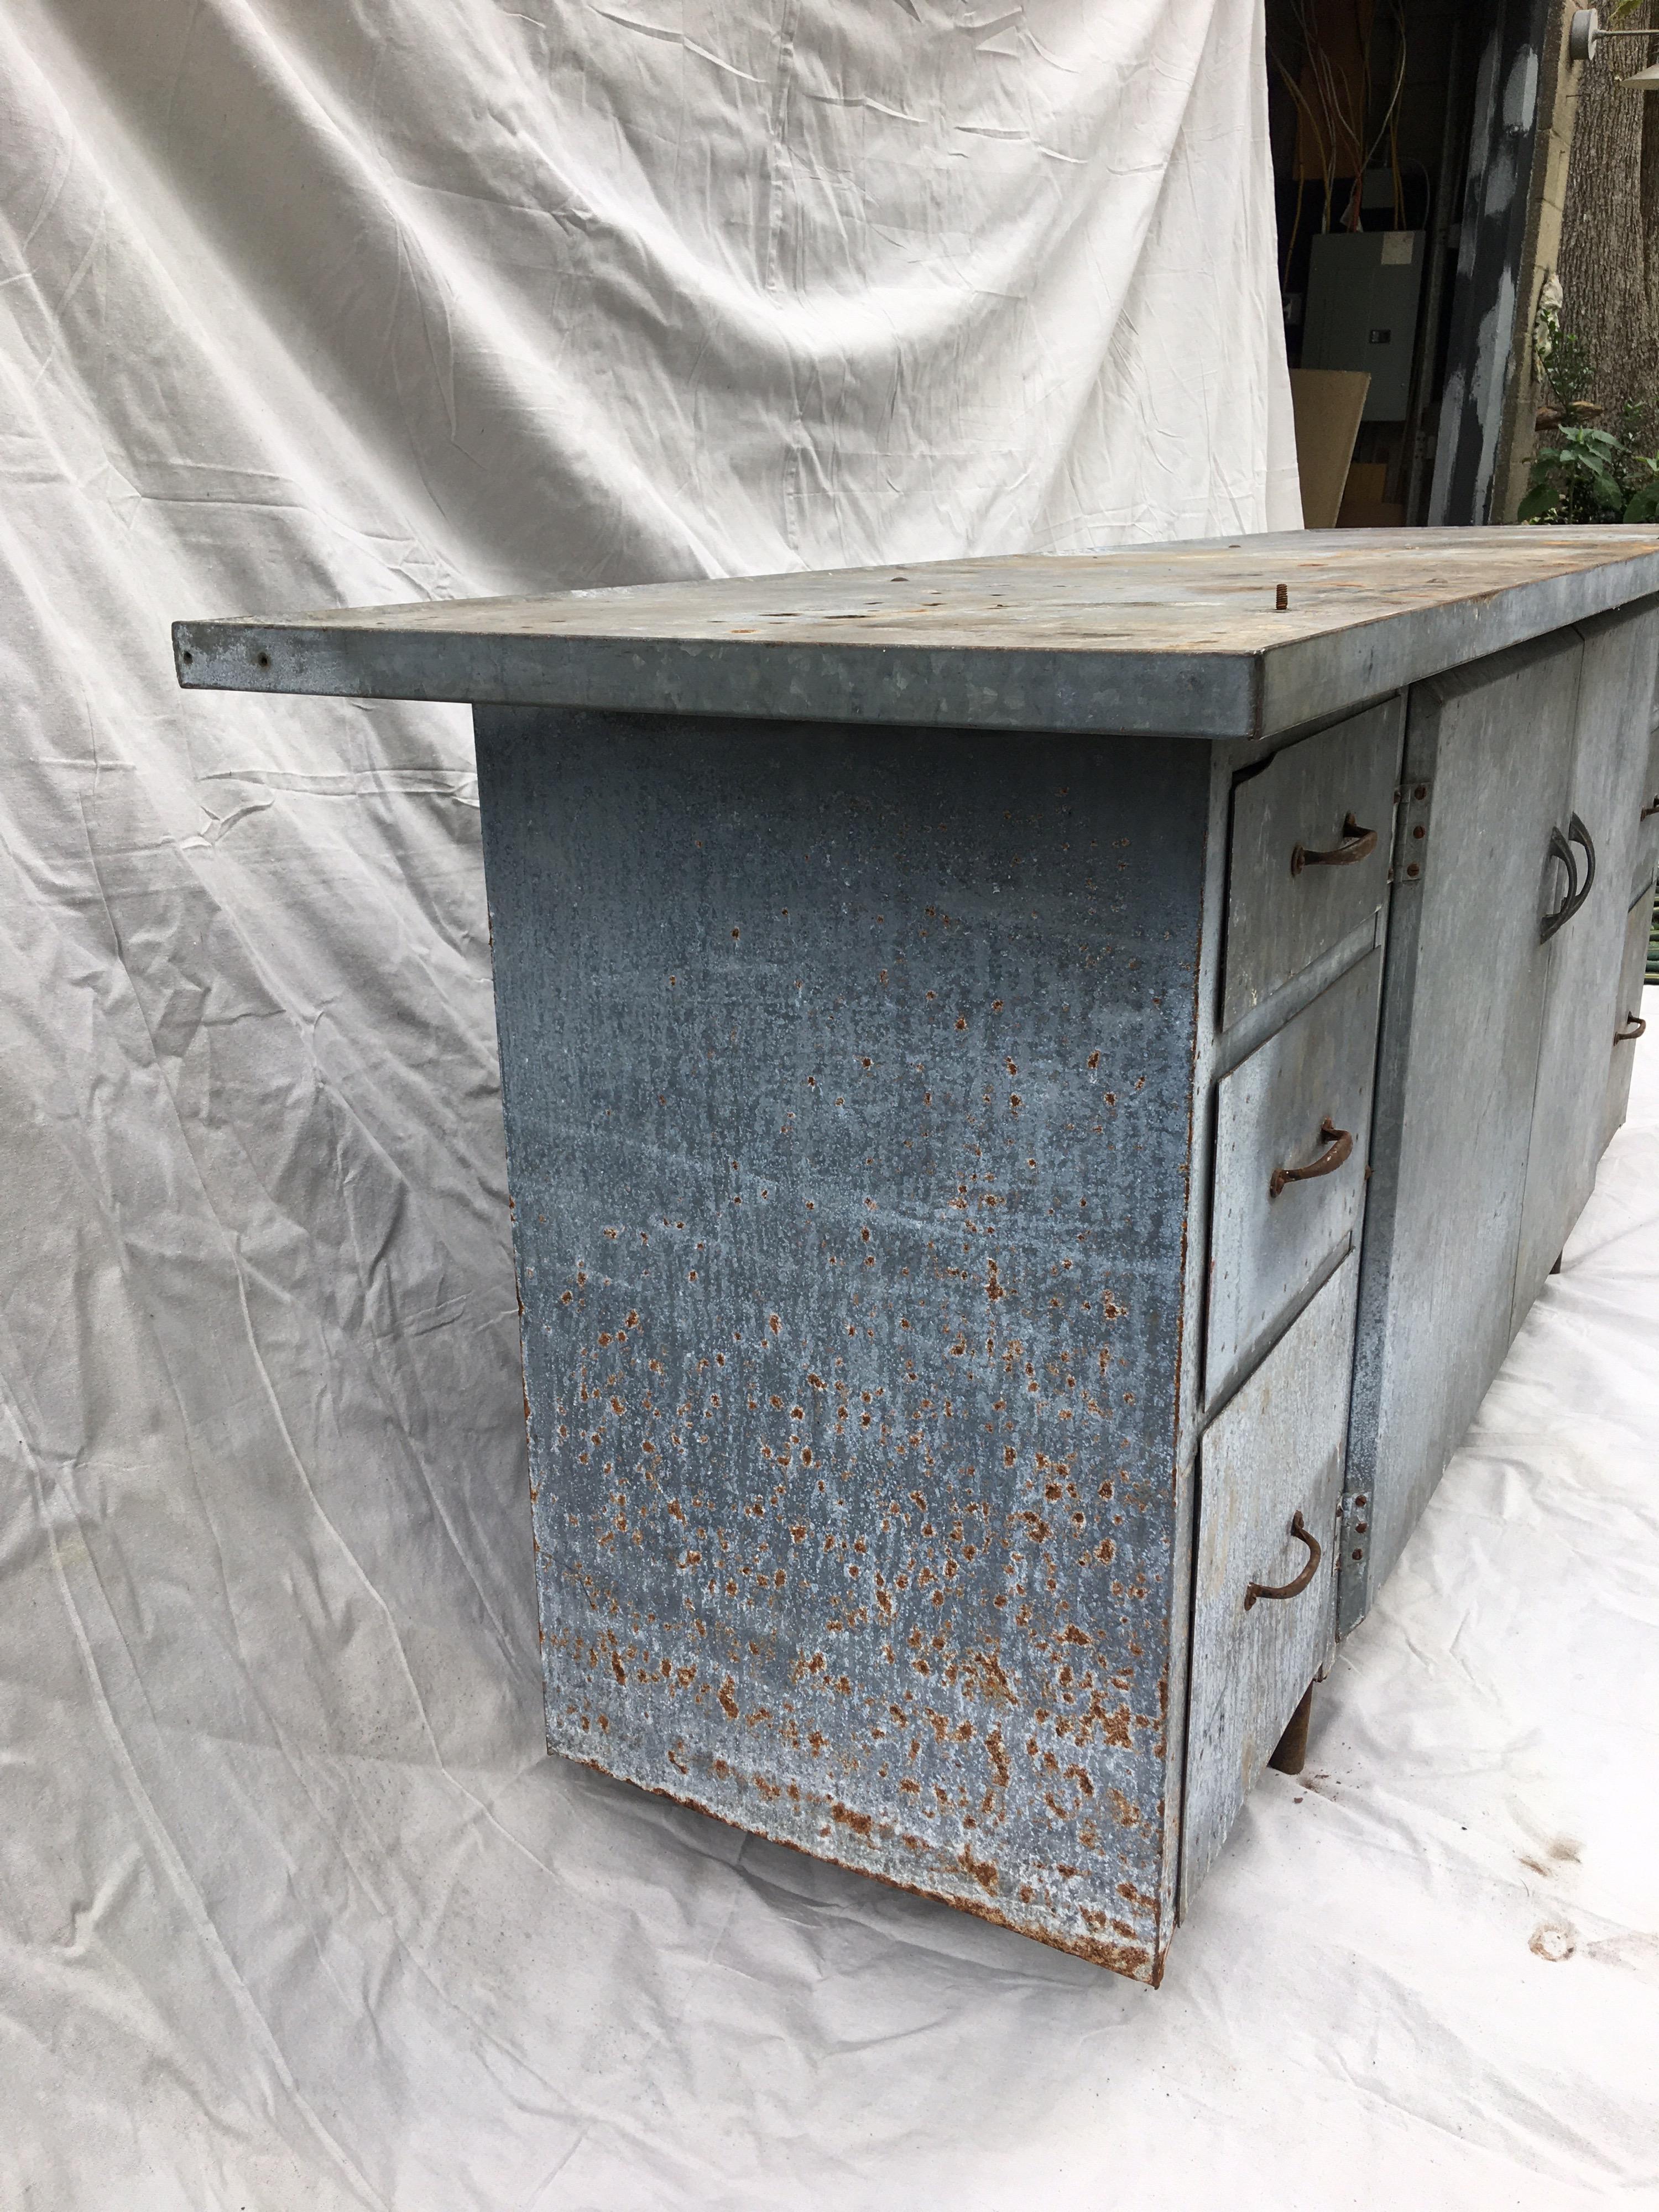 Galvanized Industrial work bench perfect to use as a kitchen Island, garden work table or credenza! Patina galvanized metal shows tons of personality! Drawers on each side with 2 large center doors that open to one large shelf. Top has an edge and